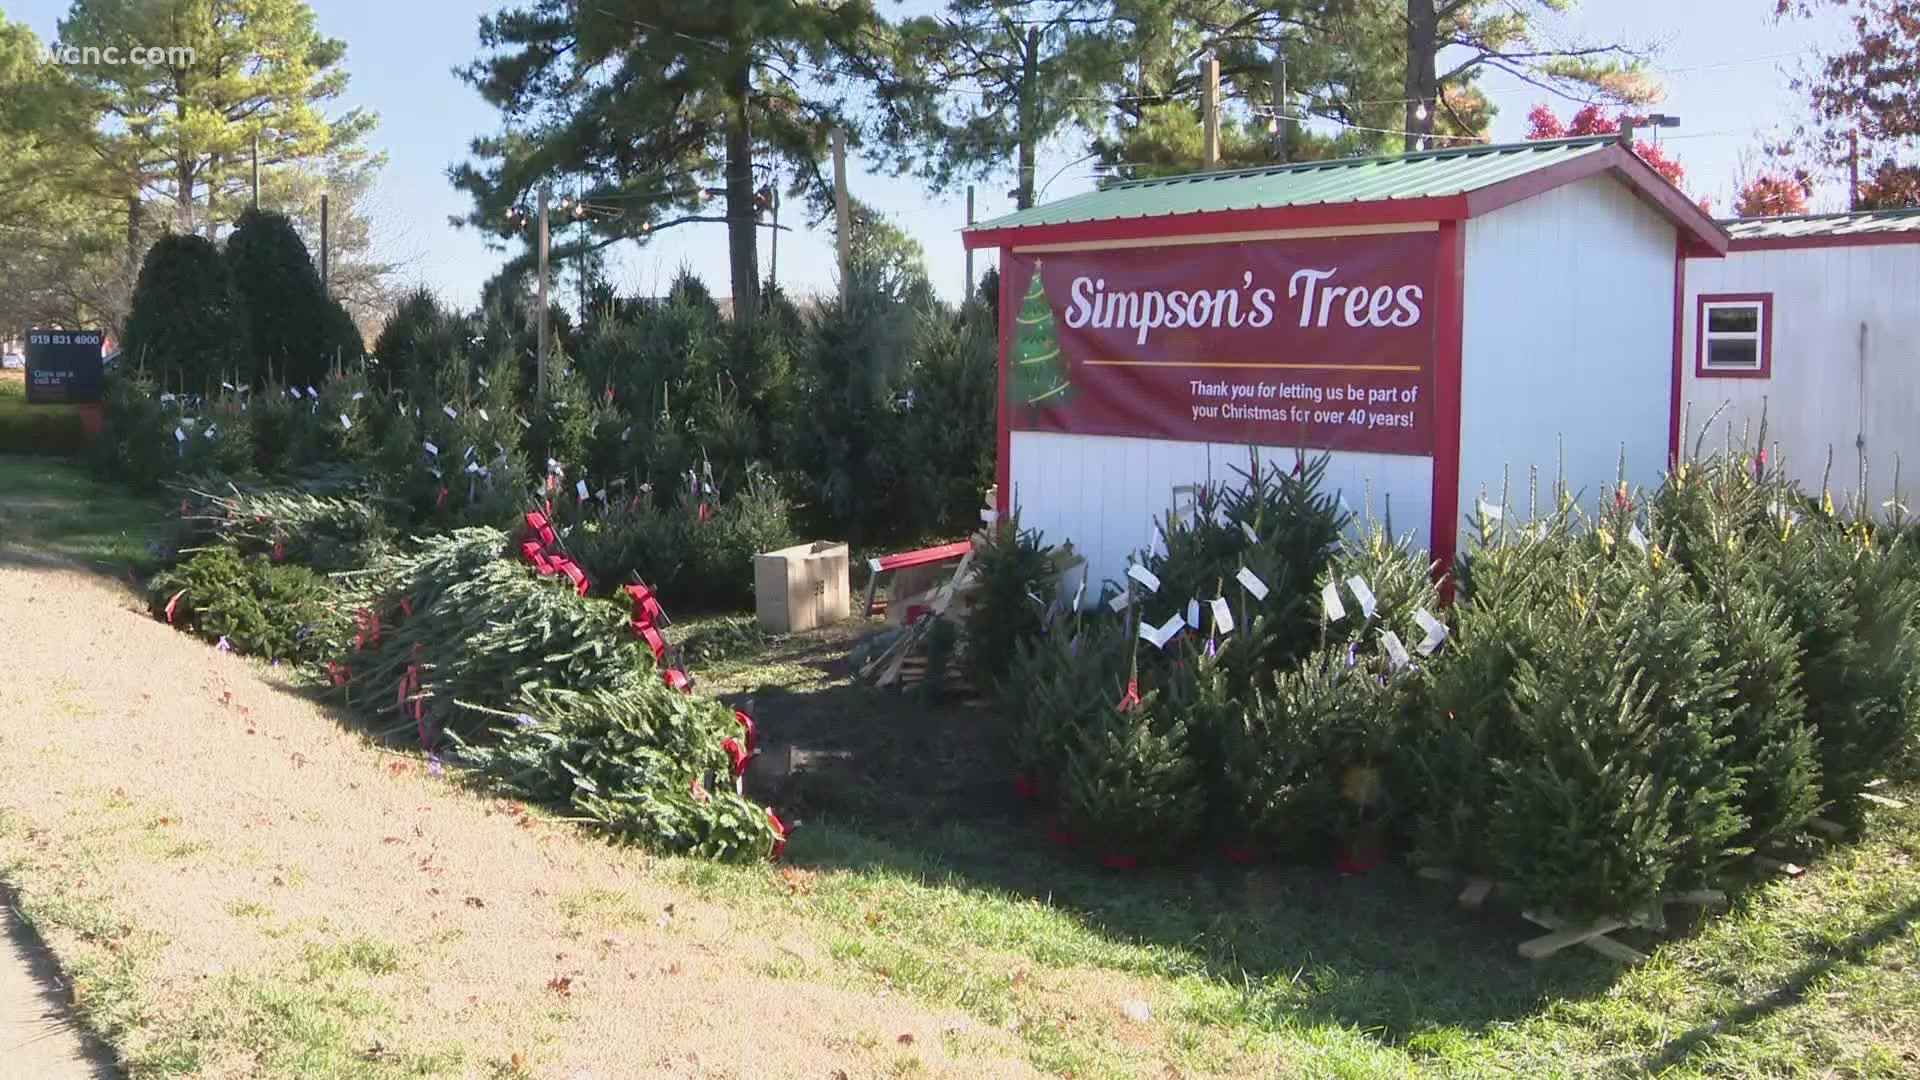 If you’re a real Christmas tree person, now is the time to find that perfect tree. Is the supply chain affecting local Christmas Trees?